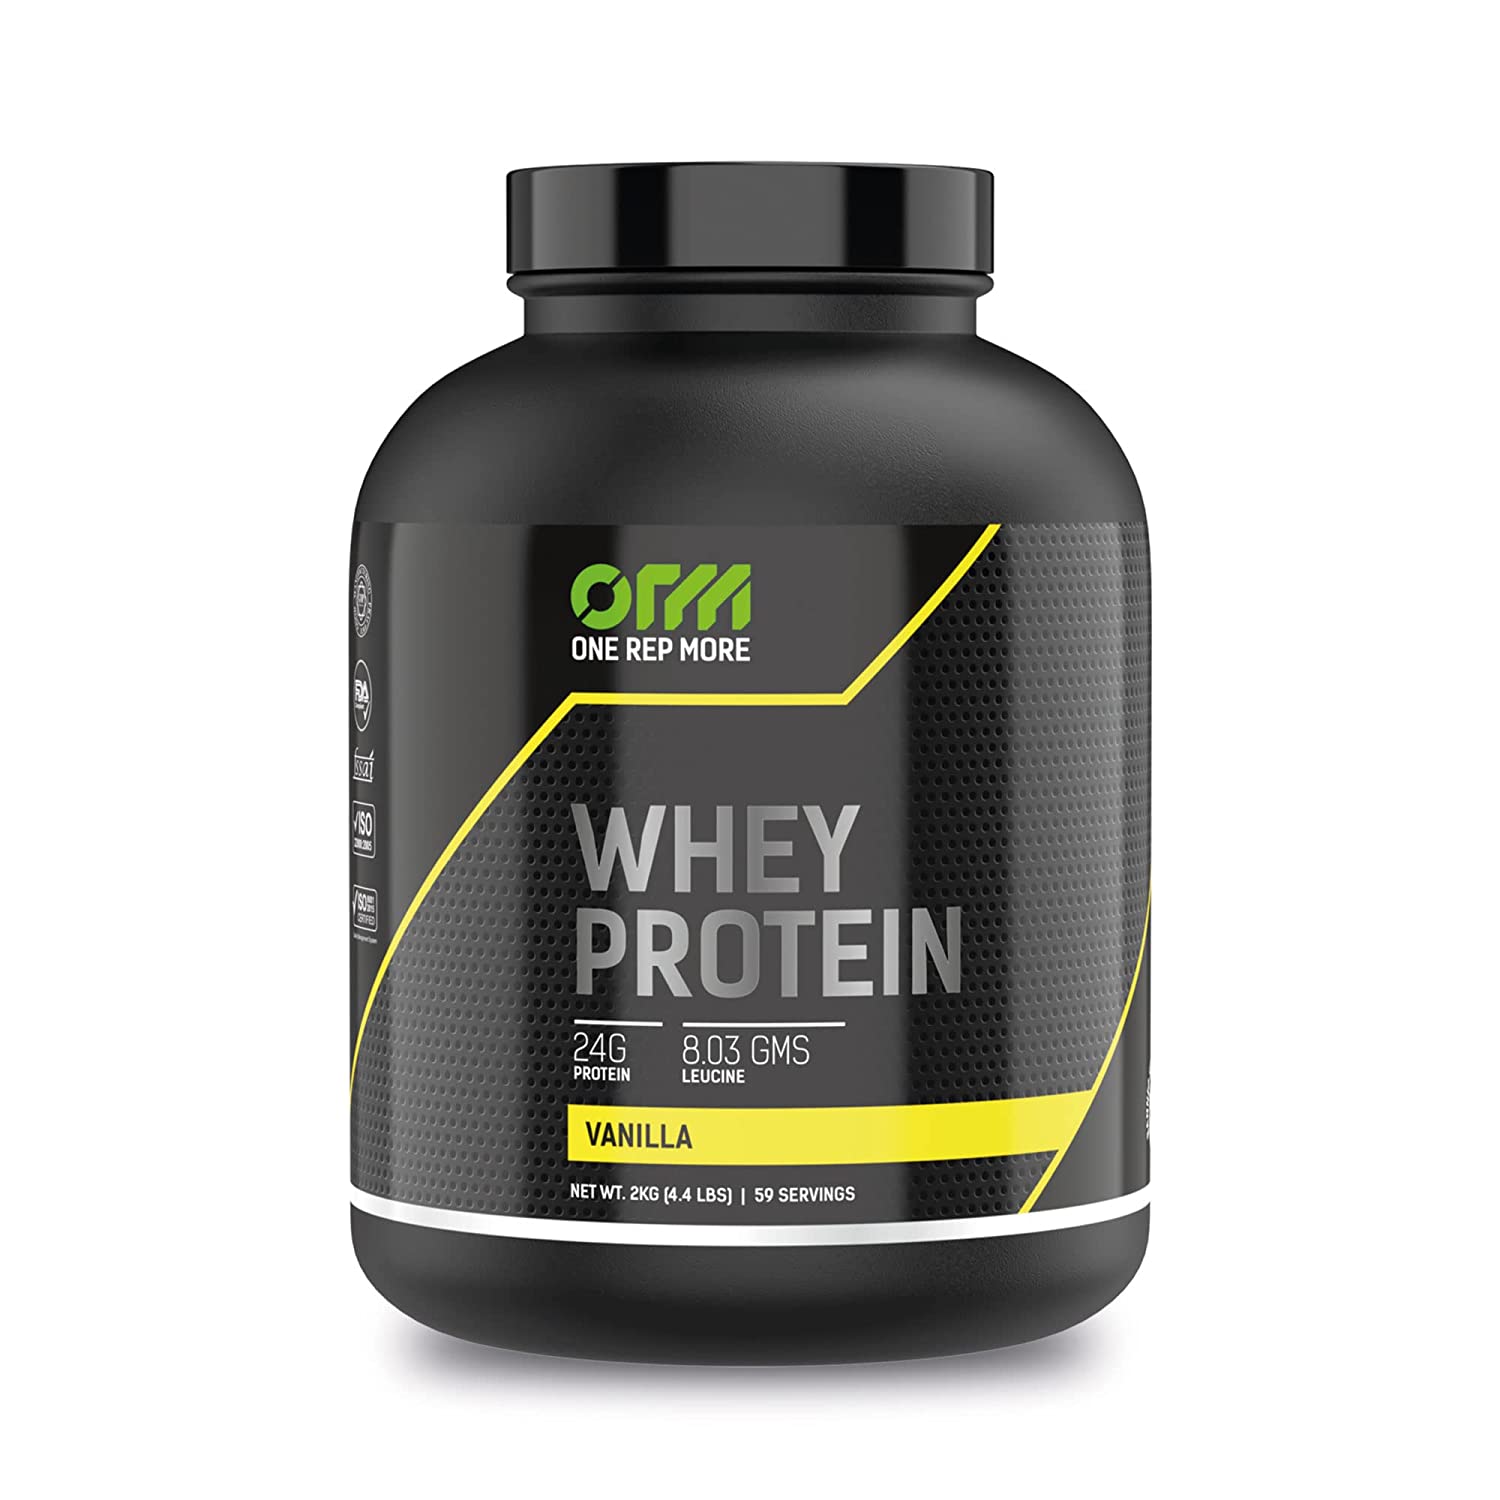 ONE REP MORE Whey Protein Image